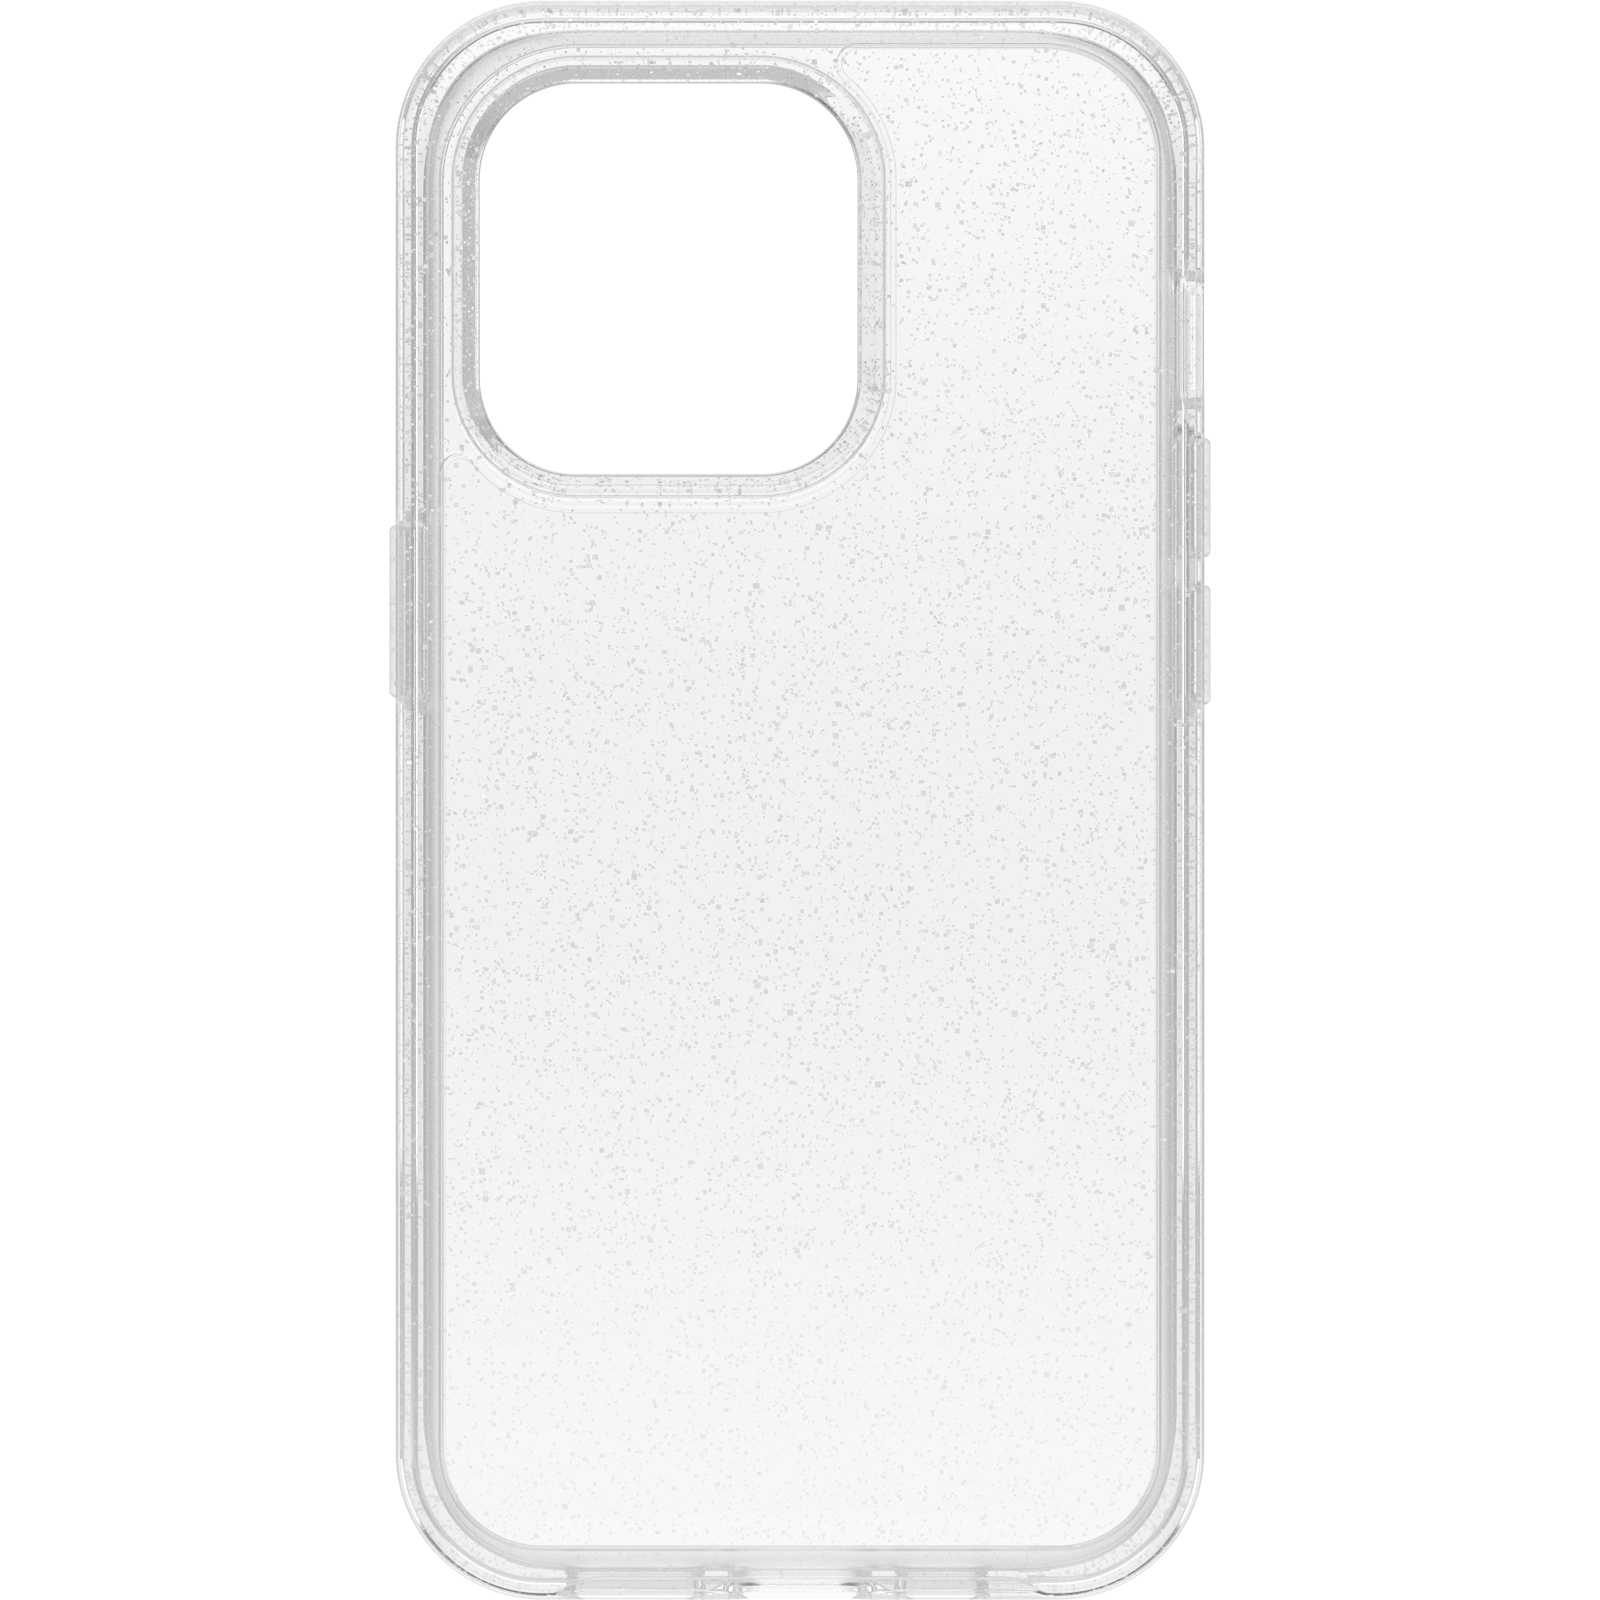 14 PRO, Symmetry, CLEAR Backcover, APPLE, OTTERBOX IPHONE